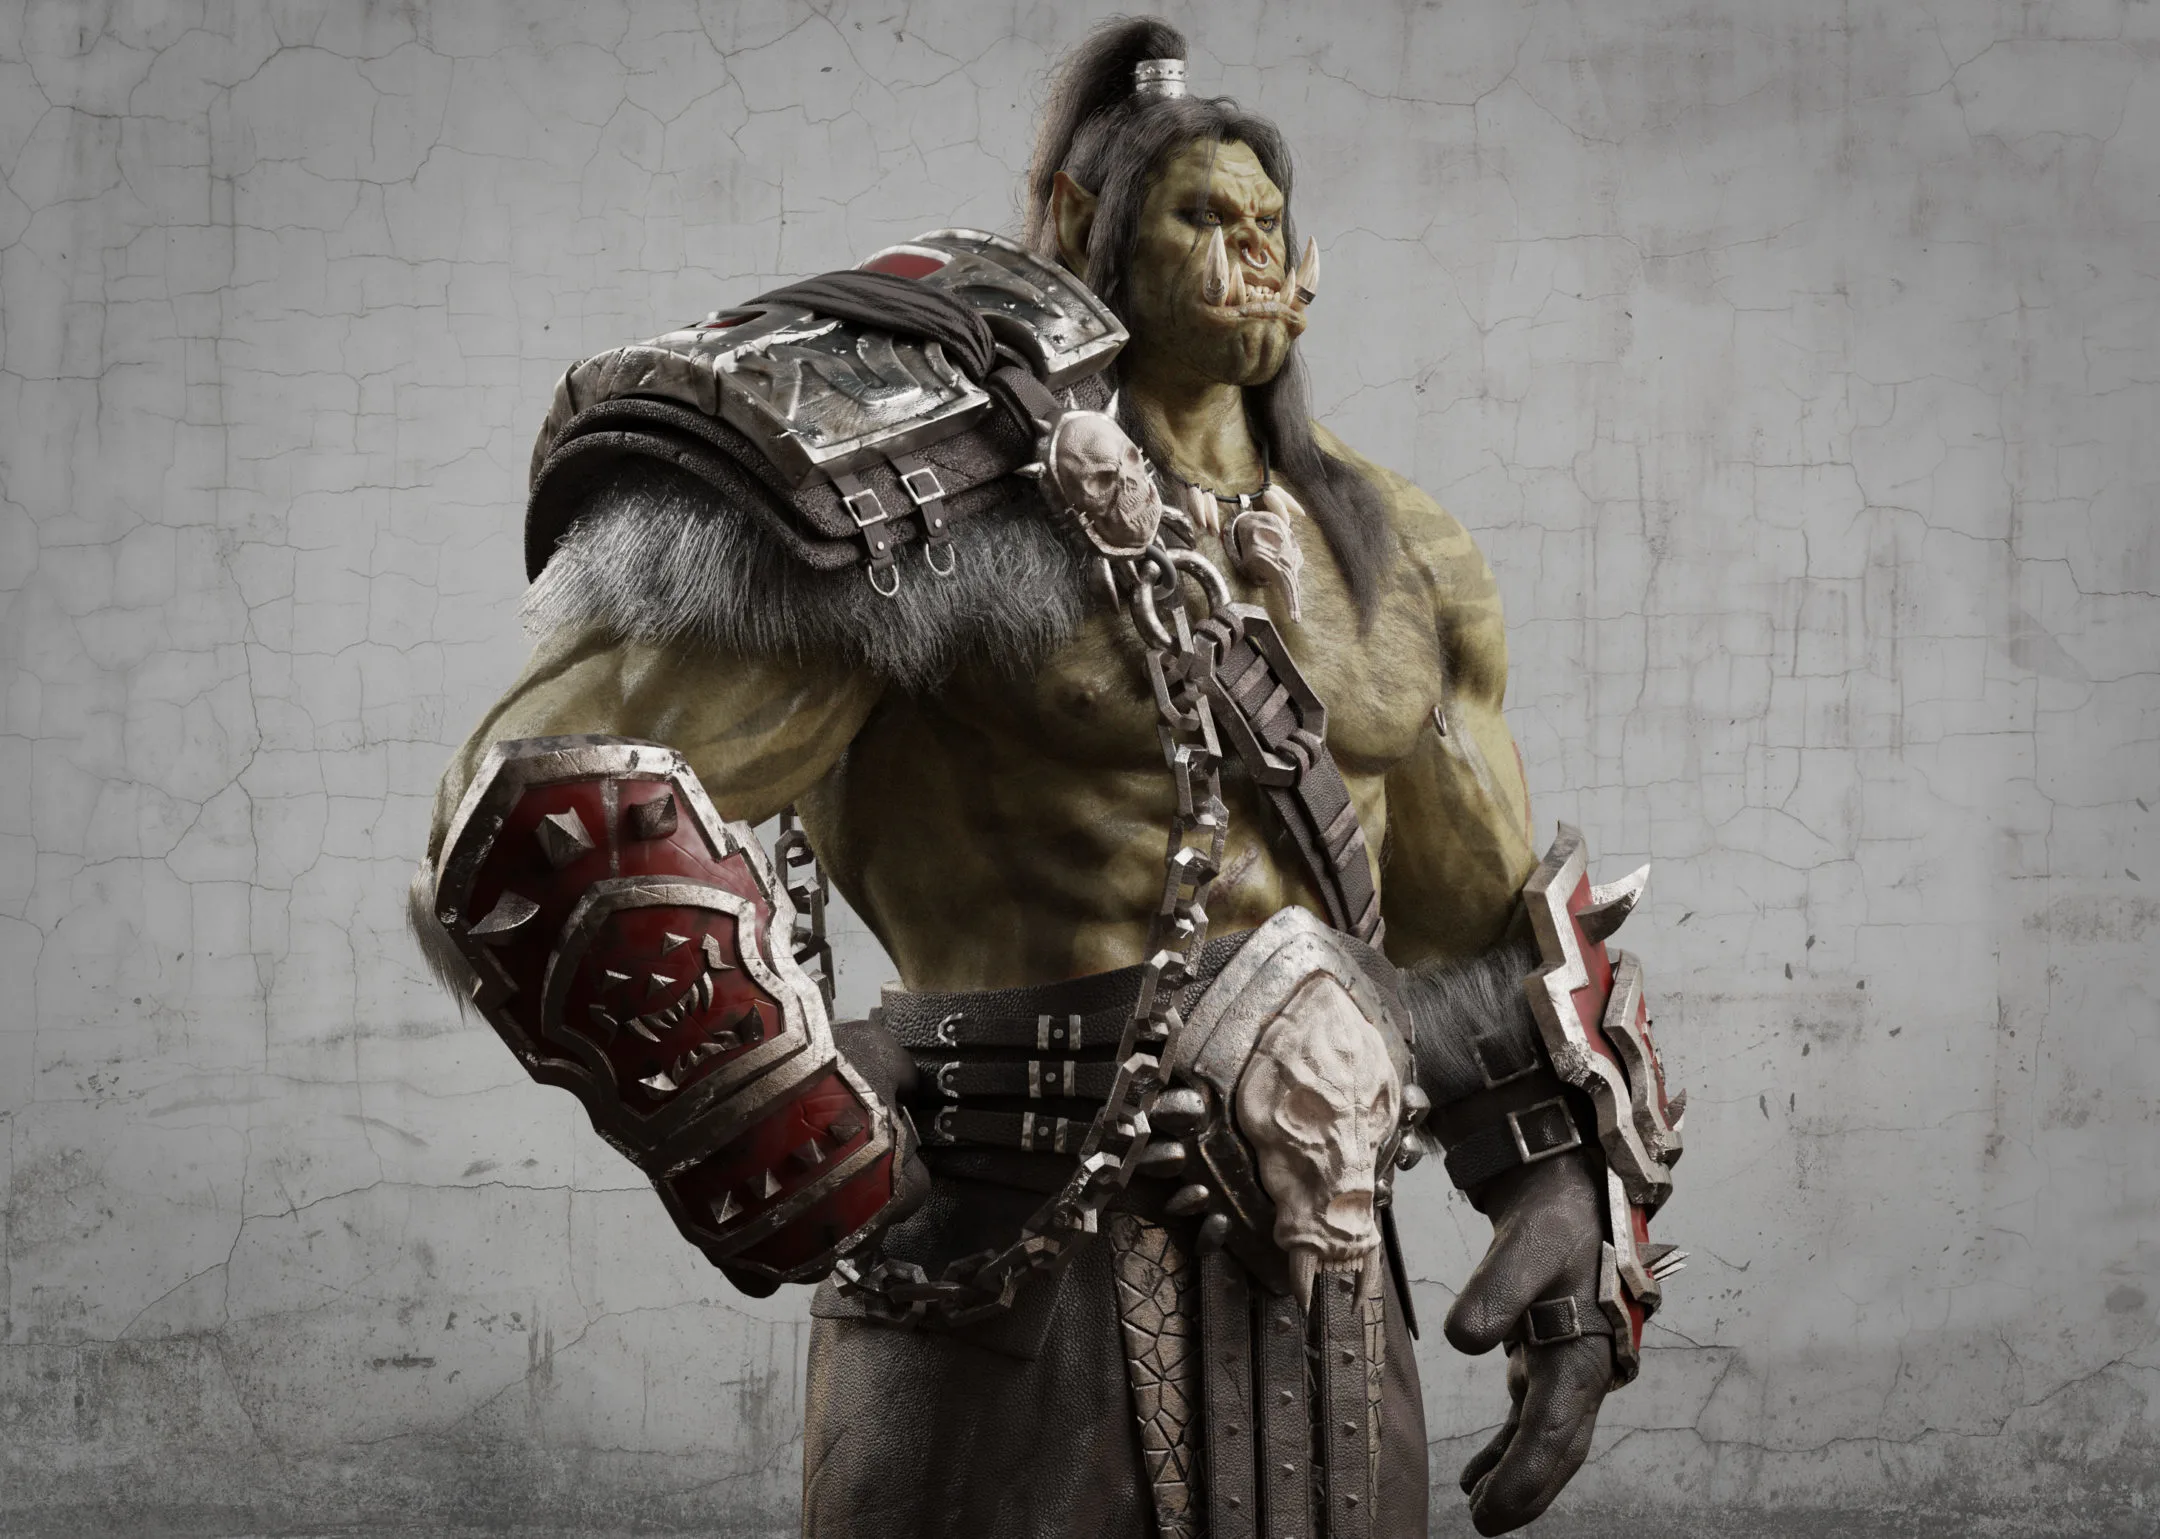 Character Creation in Blender Masterclass - Orc Creation